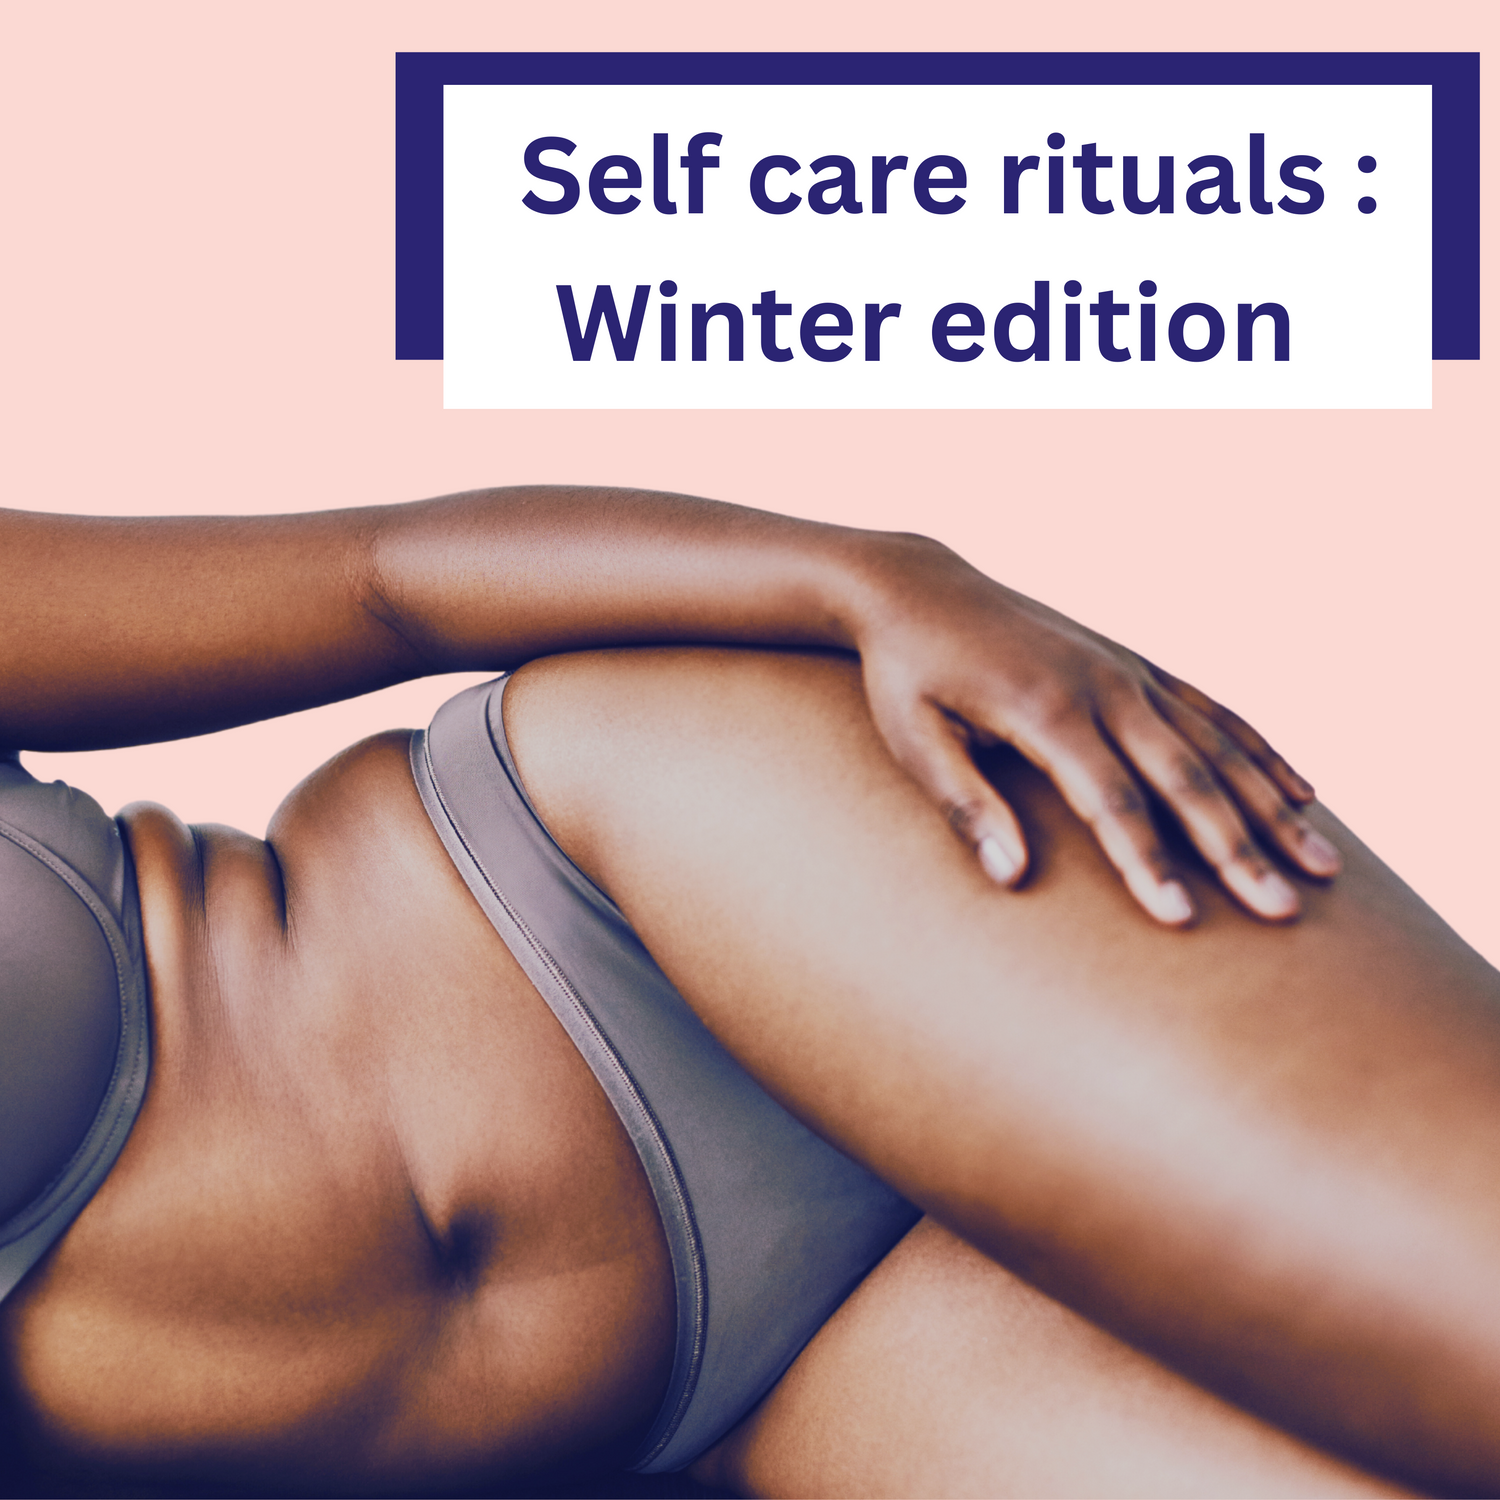 Winter-Proof Your Intimate Care Routine: Essential Tips for Winter Intimate Hair Removal Down There